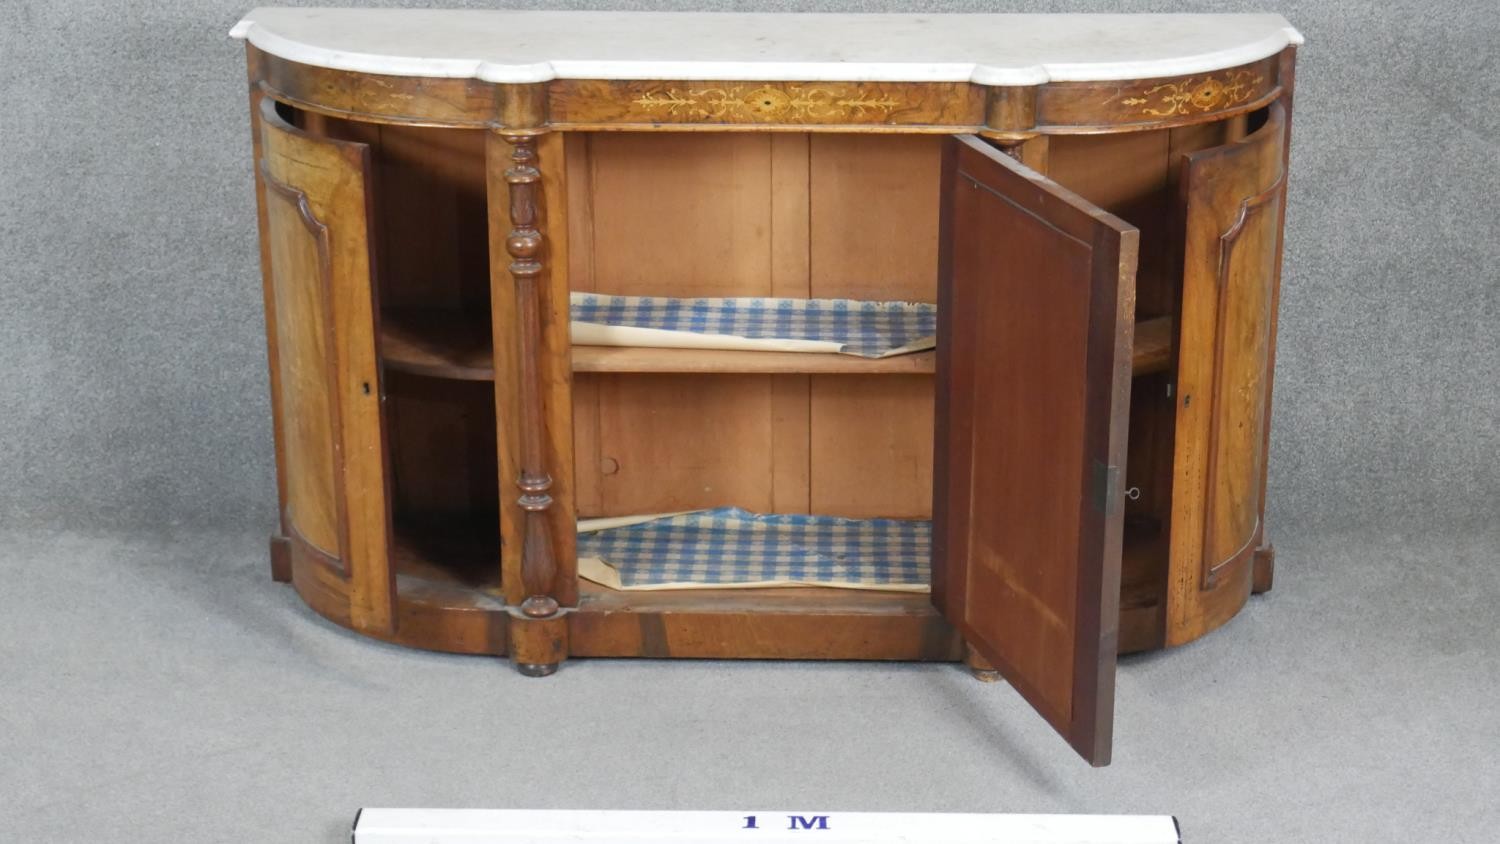 A Victorian burr walnut and satinwood Arabesque inlaid credenza with marble top above cupboards on - Image 2 of 4